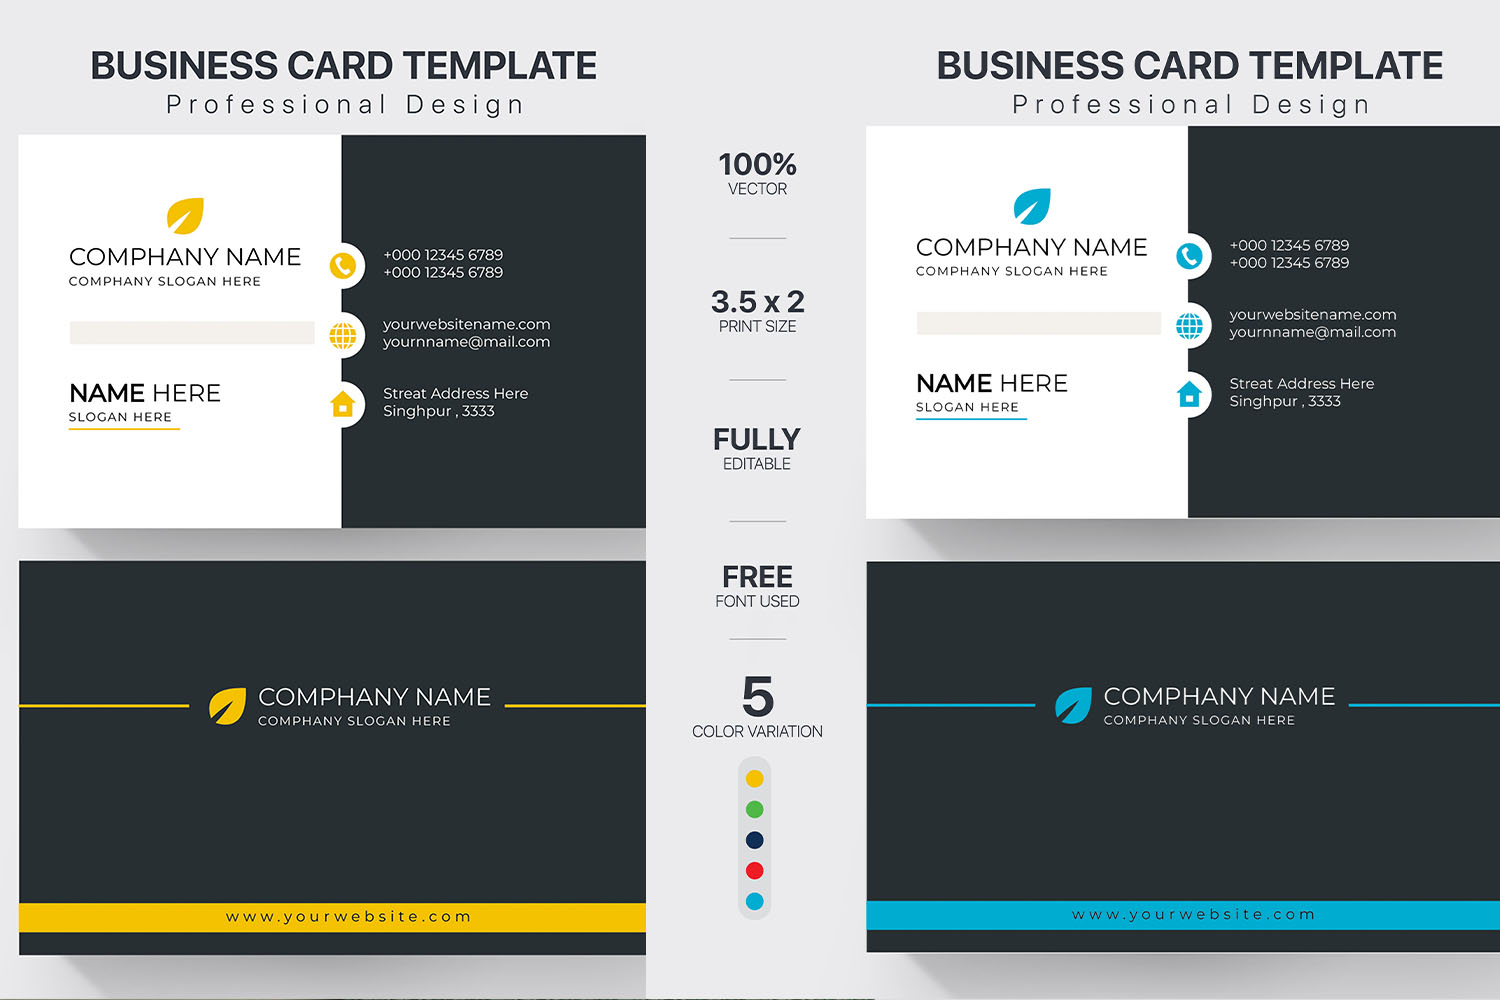 A selection of amazing double sided business card template images.